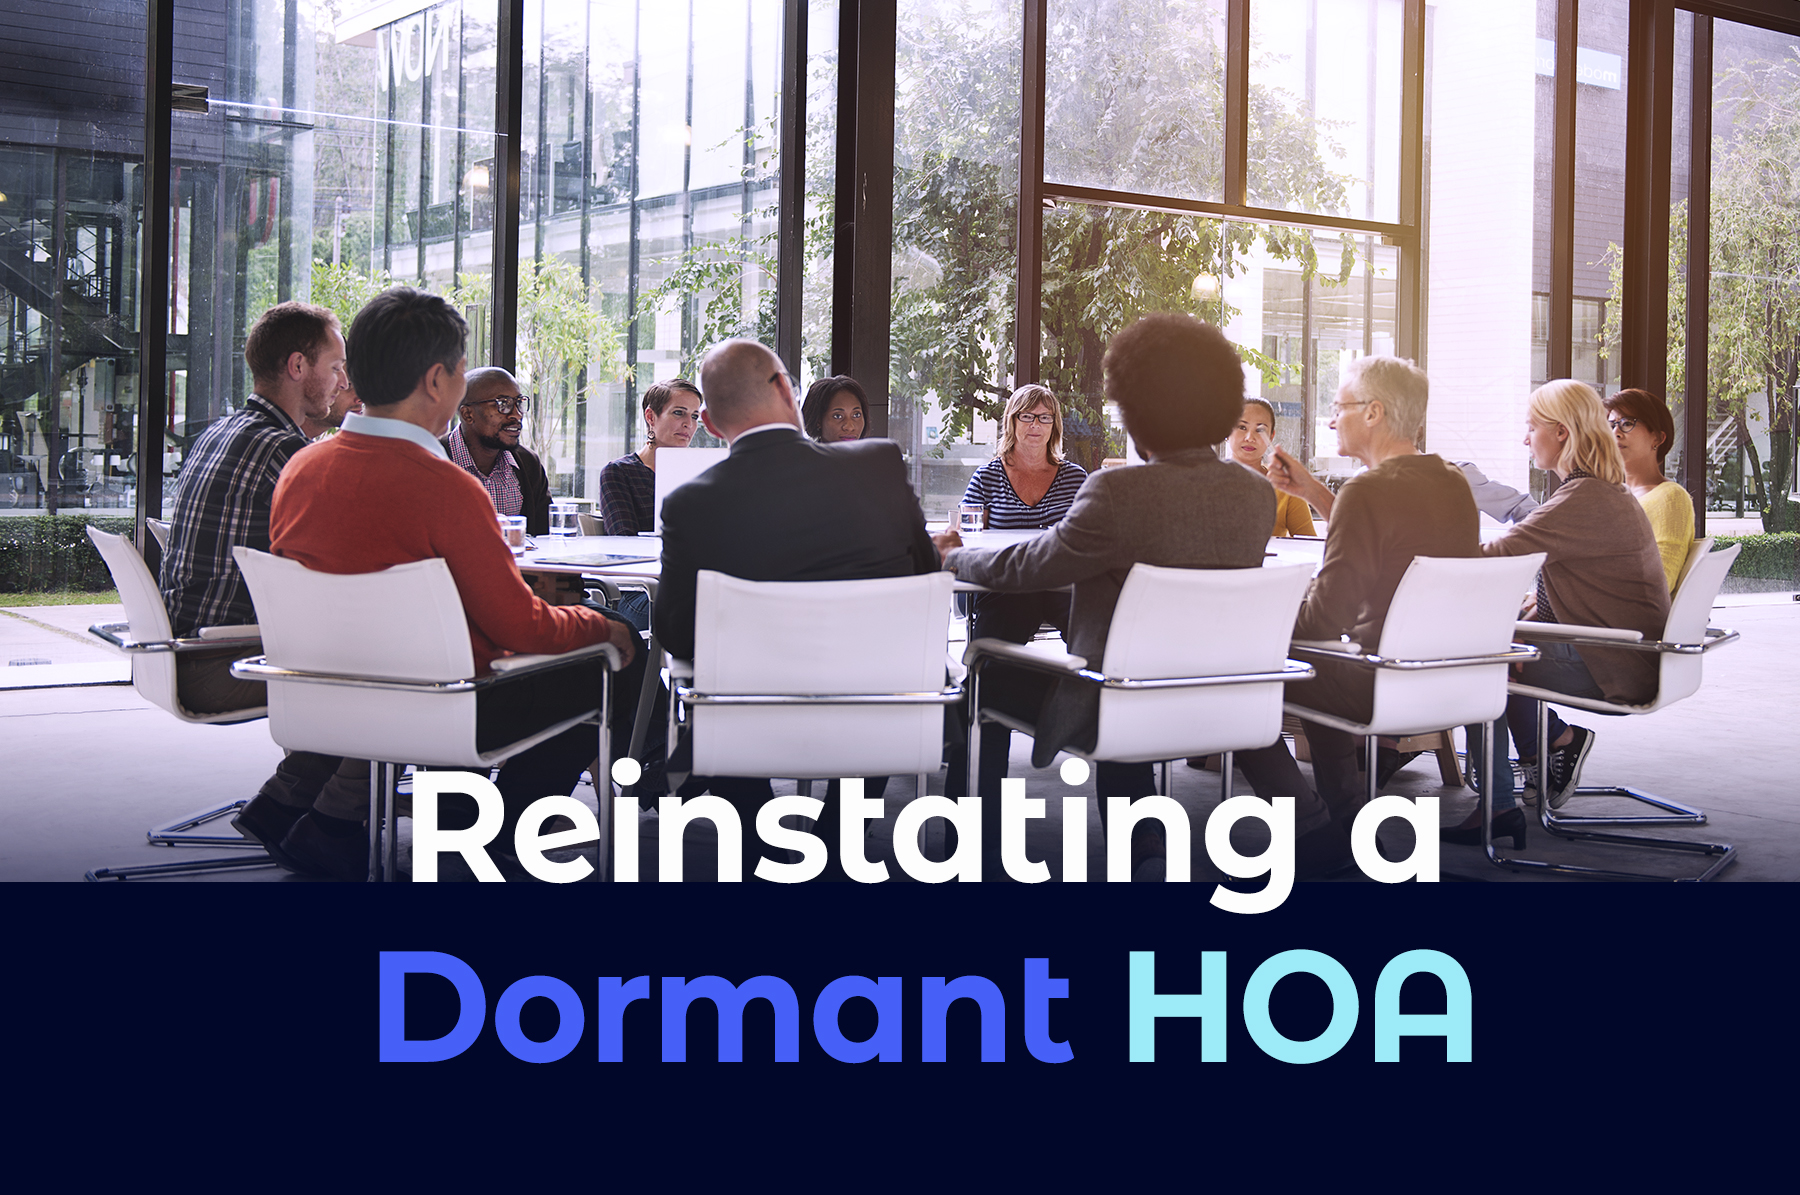 Hoa board meeting in a room with big windows and the phrase "Reinstating aDormant HOAe